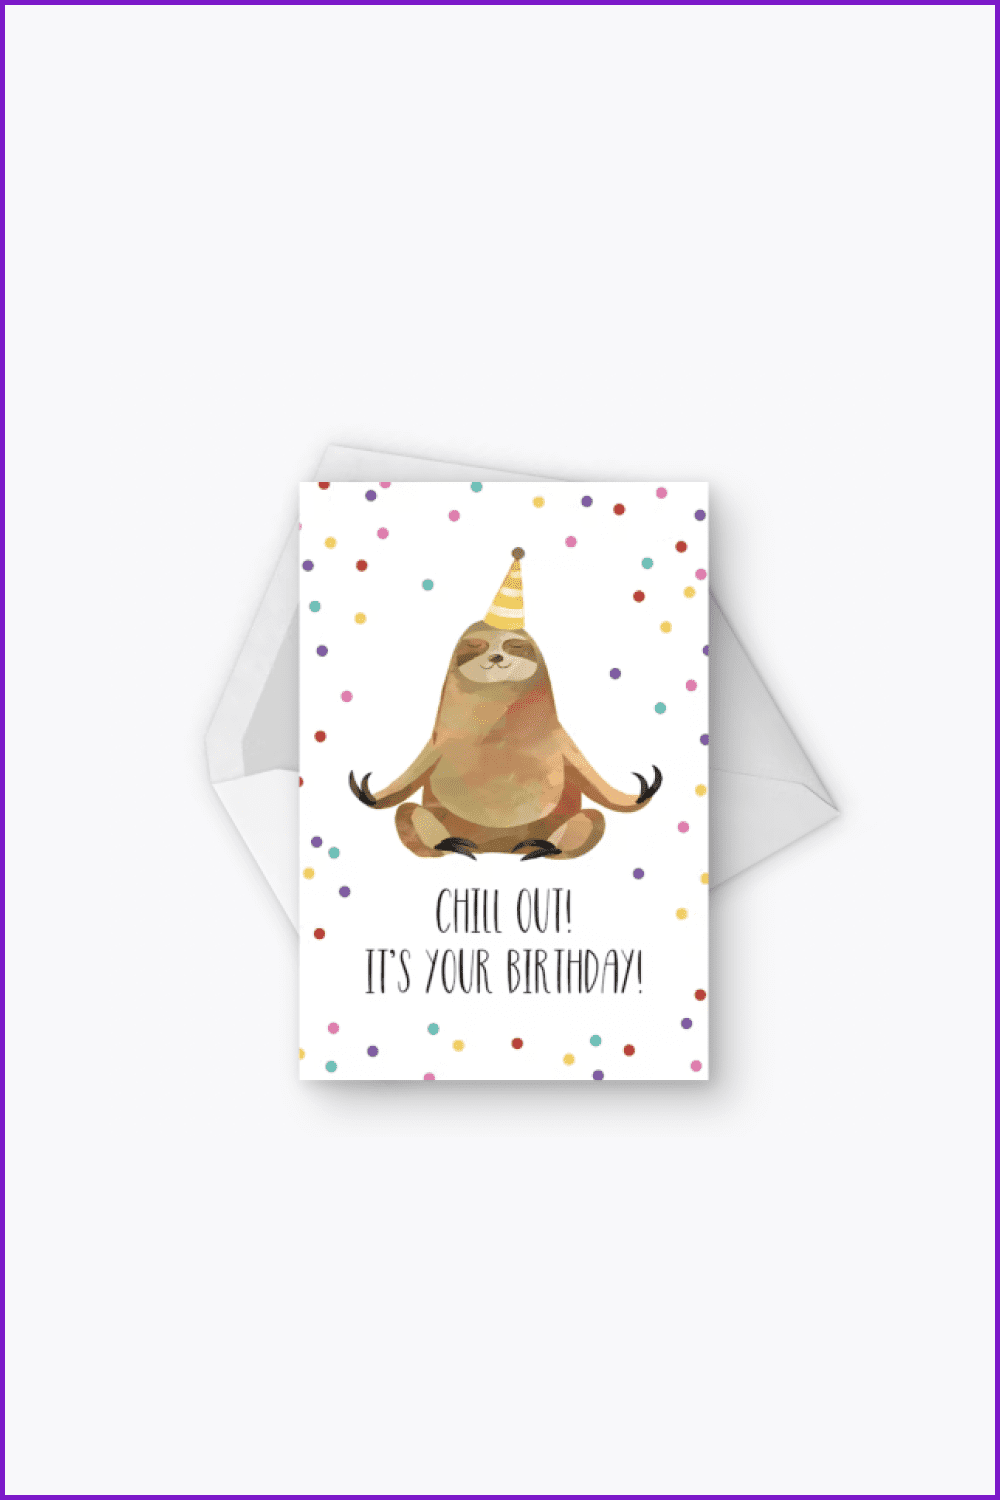 Birthday card with a happy sloth.